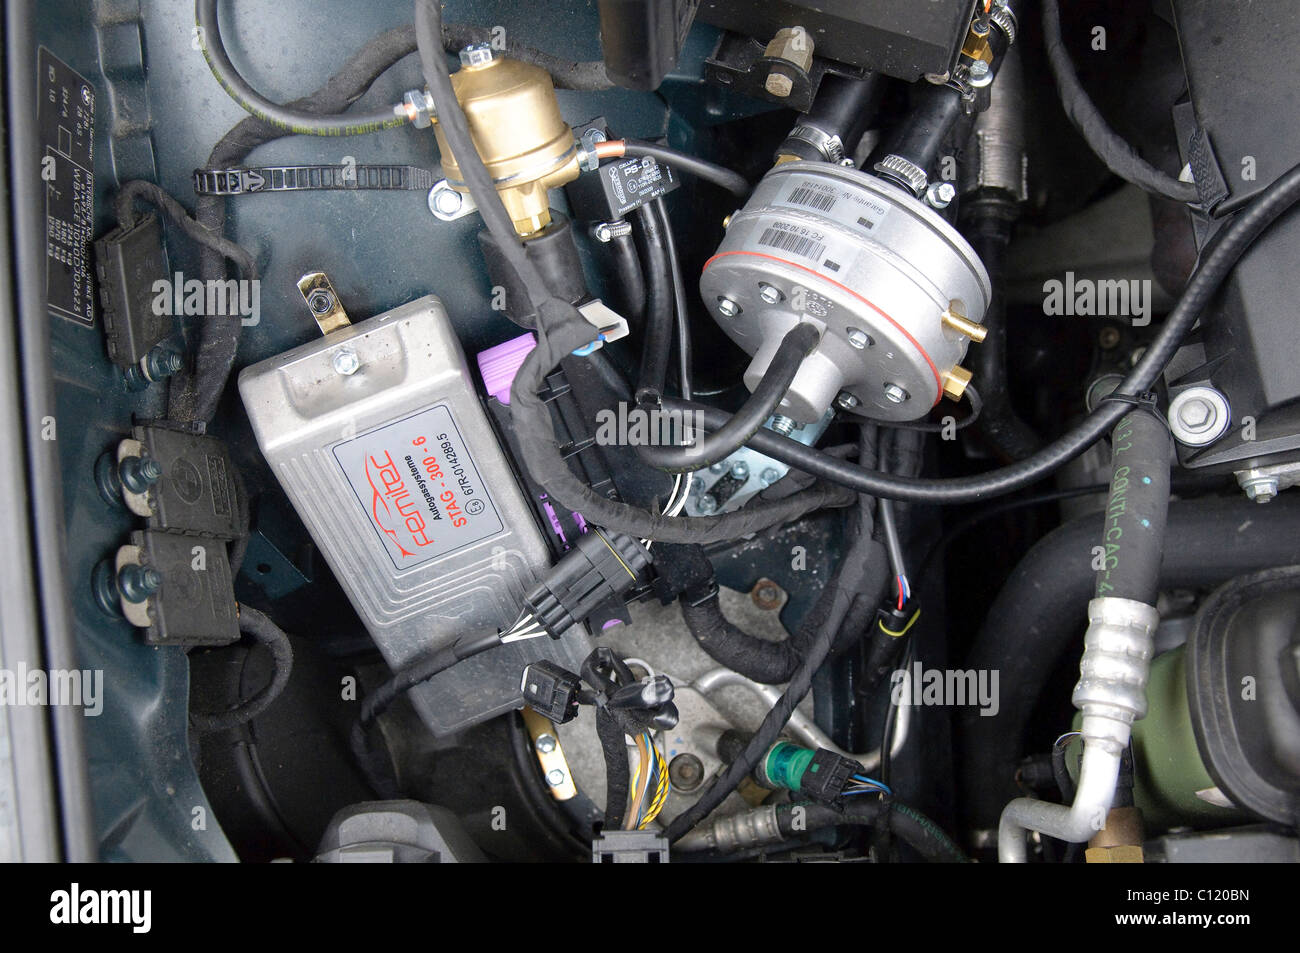 LPG system STAG-300-6 plus in car of the BMW 7 Series, model built 1997, 6-cylinder straight engine with 142kW, Stuttgart Stock Photo - Alamy